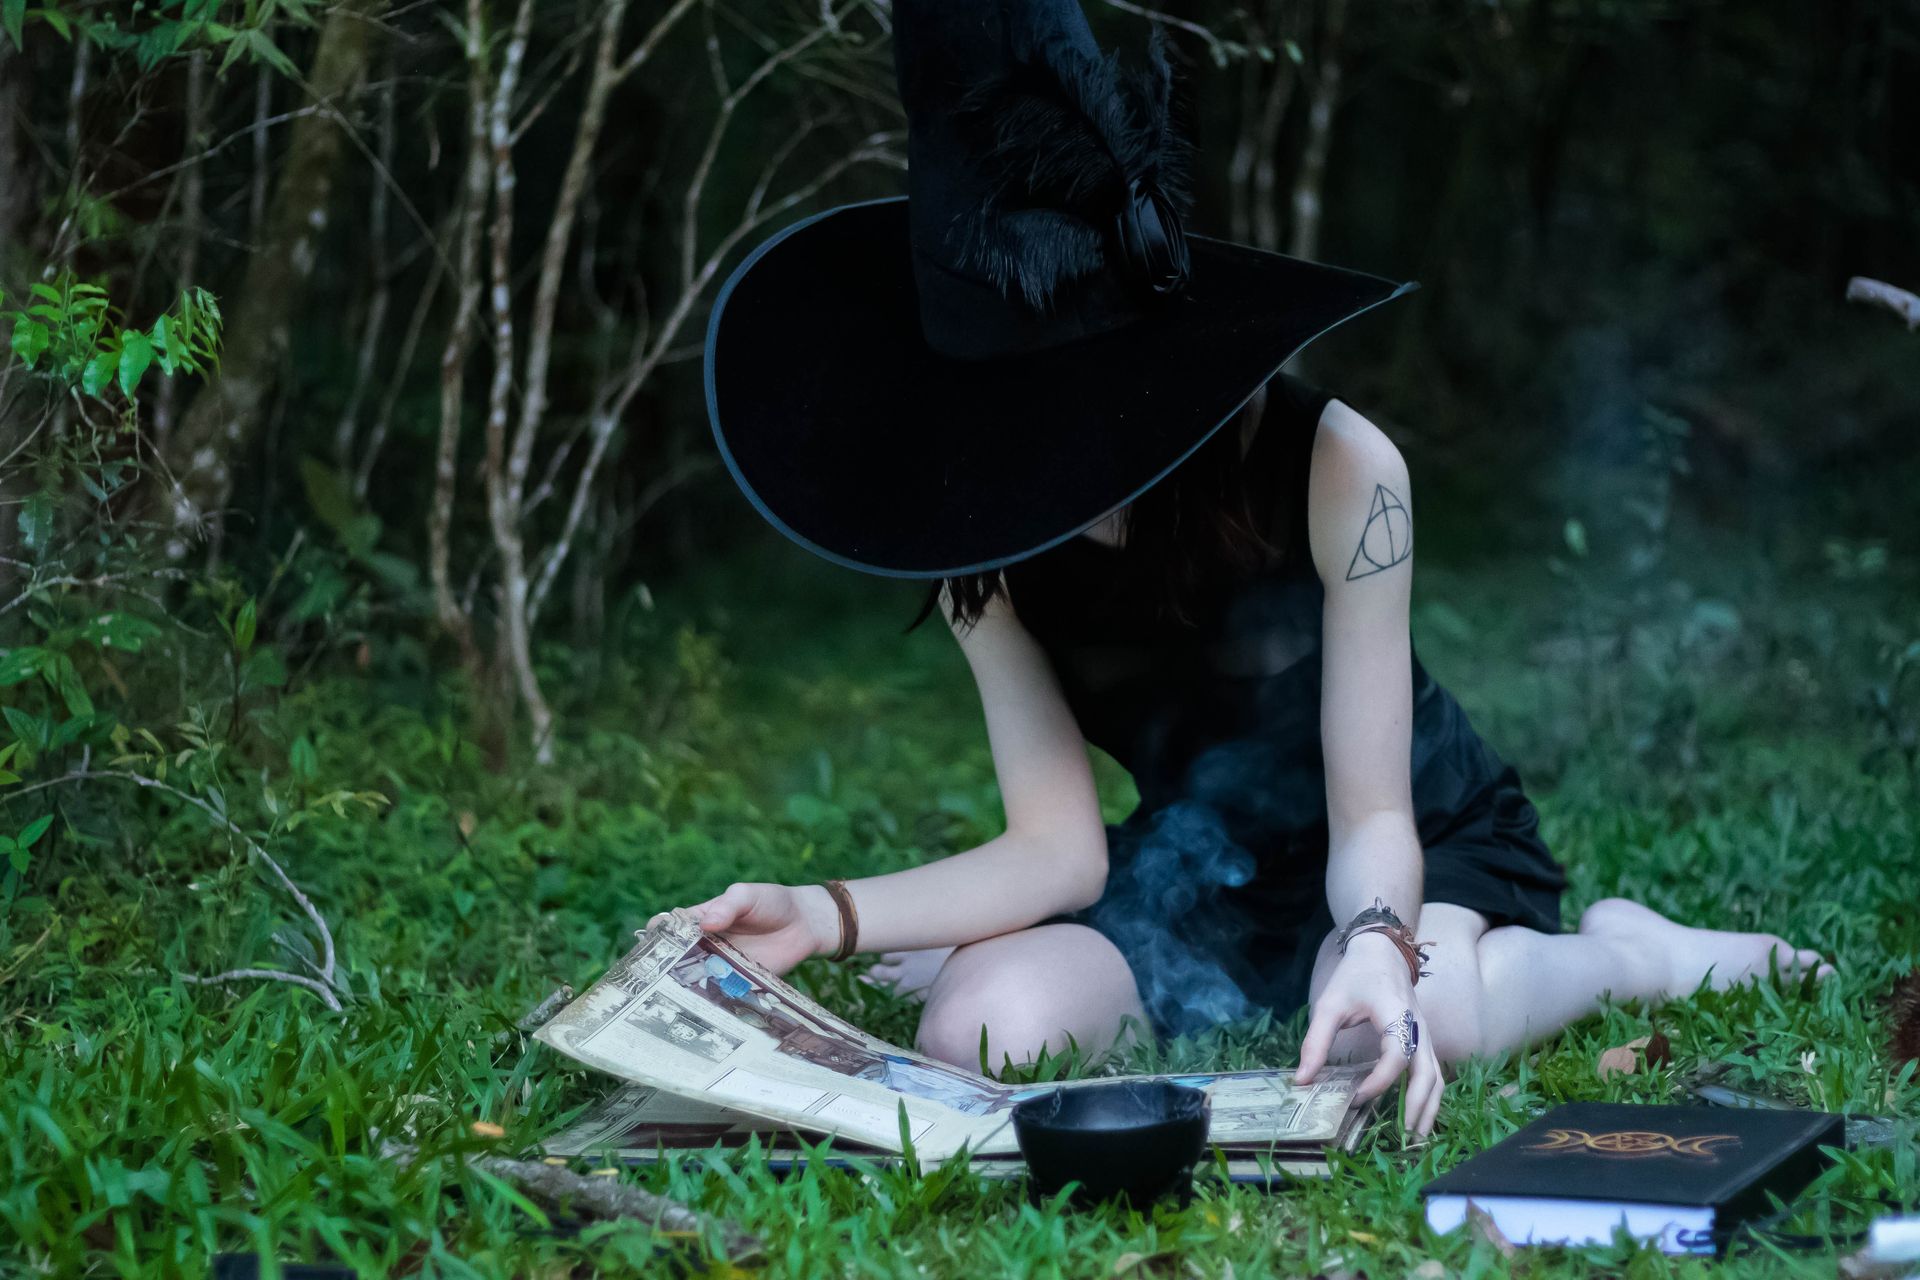 a witch in a hat is sitting on the grass reading a book.